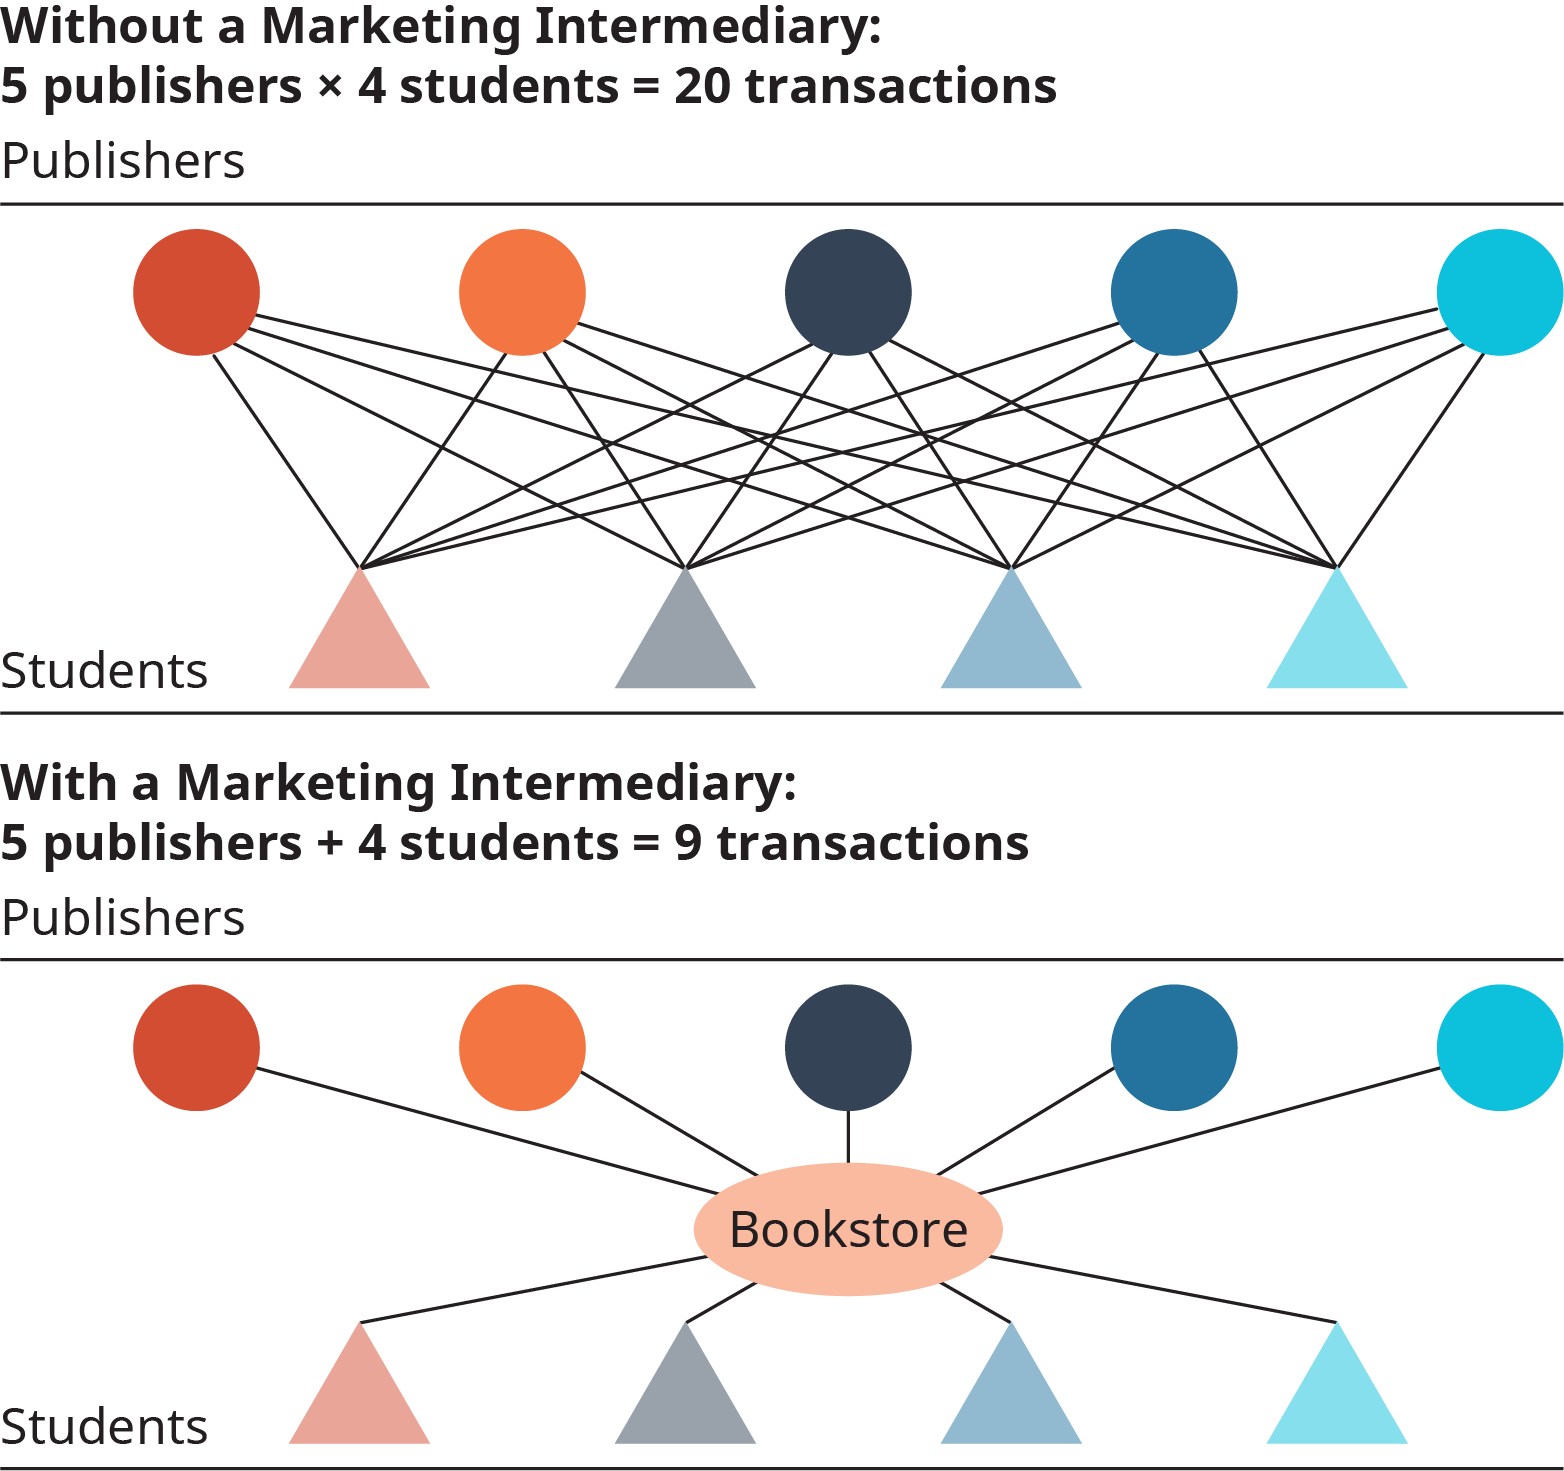 Two diagrams. The first shows transactions between 5 publishers and 4 students without a marketing intermediary. This results in 20 transactions. The second diagram shows 5 transactions between 5 publishers and 4 students with a marketing intermediary (the Bookstore). This results in 9 transactions.